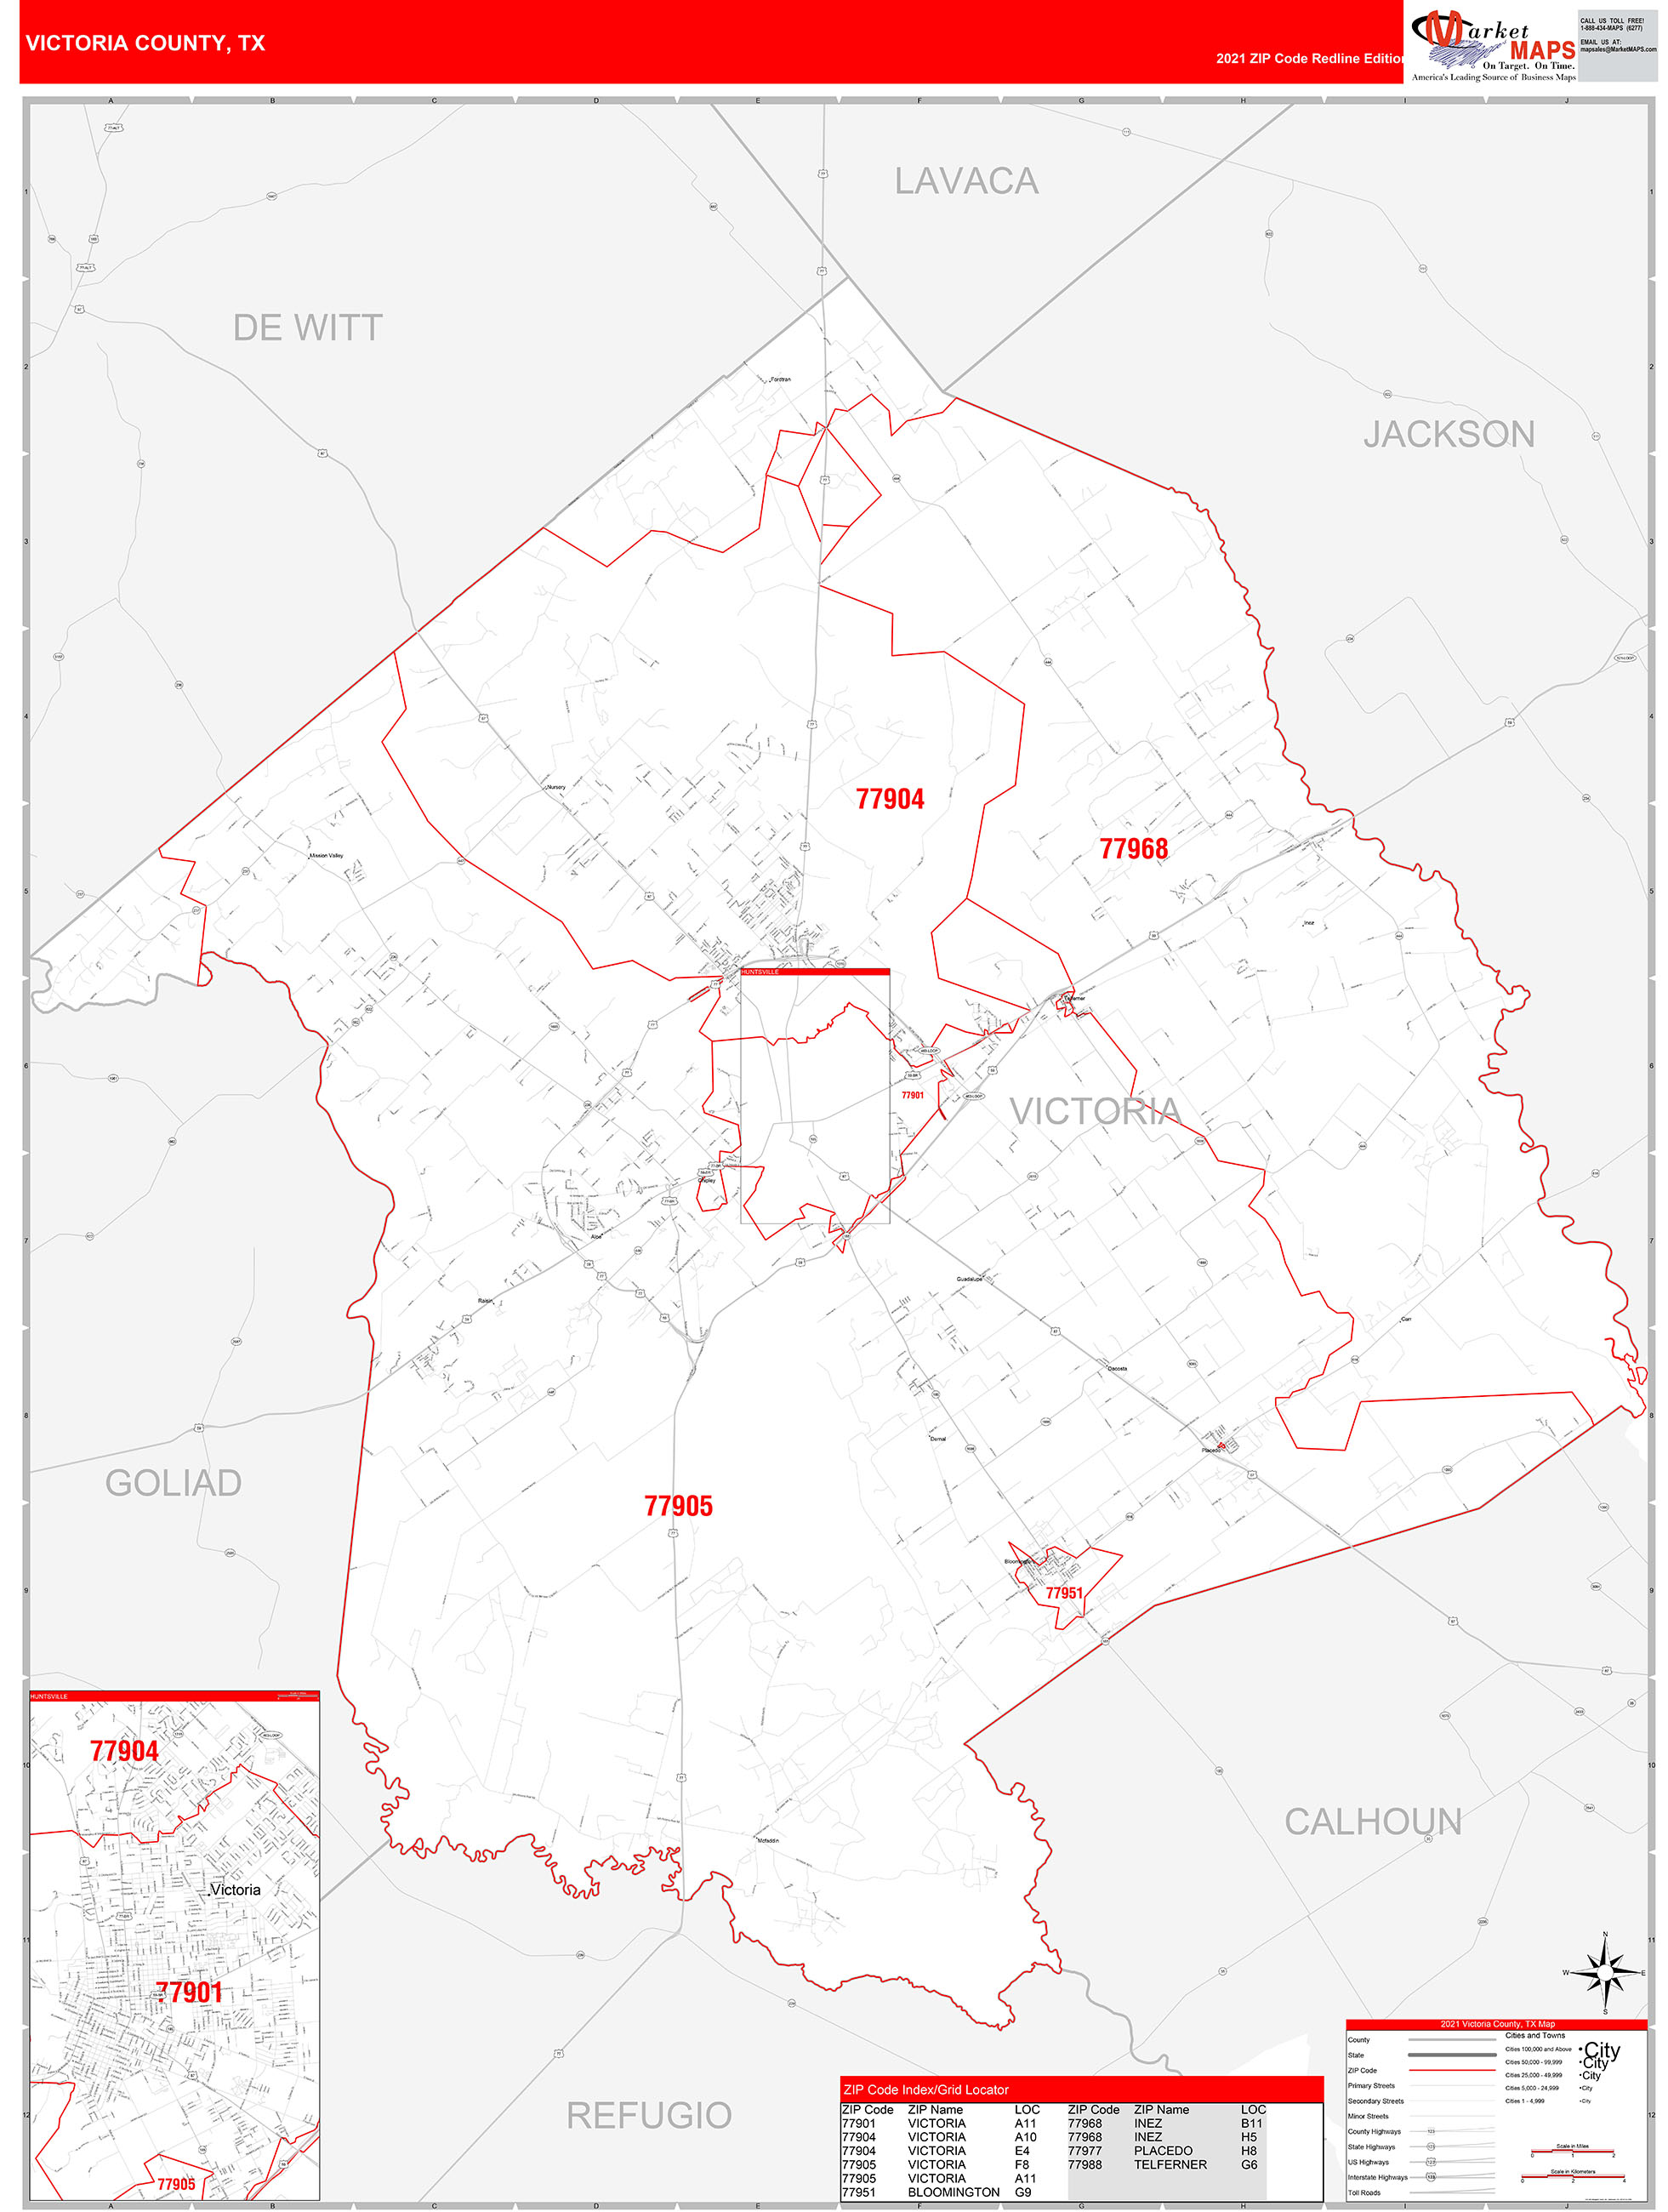 Victoria County, TX Zip Code Wall Map Red Line Style by MarketMAPS ...